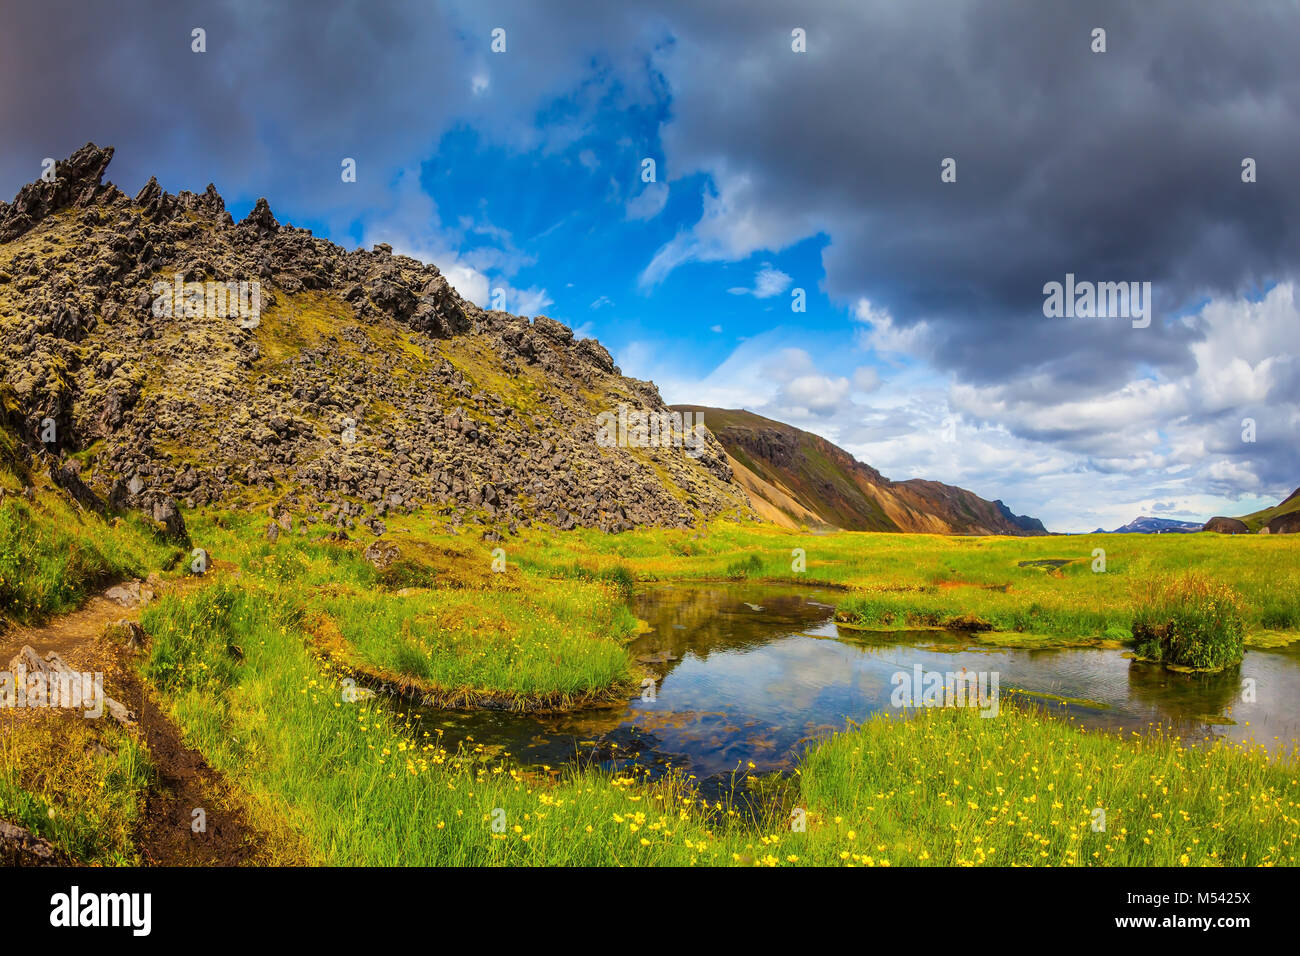 The grass among the thermal springs Stock Photo